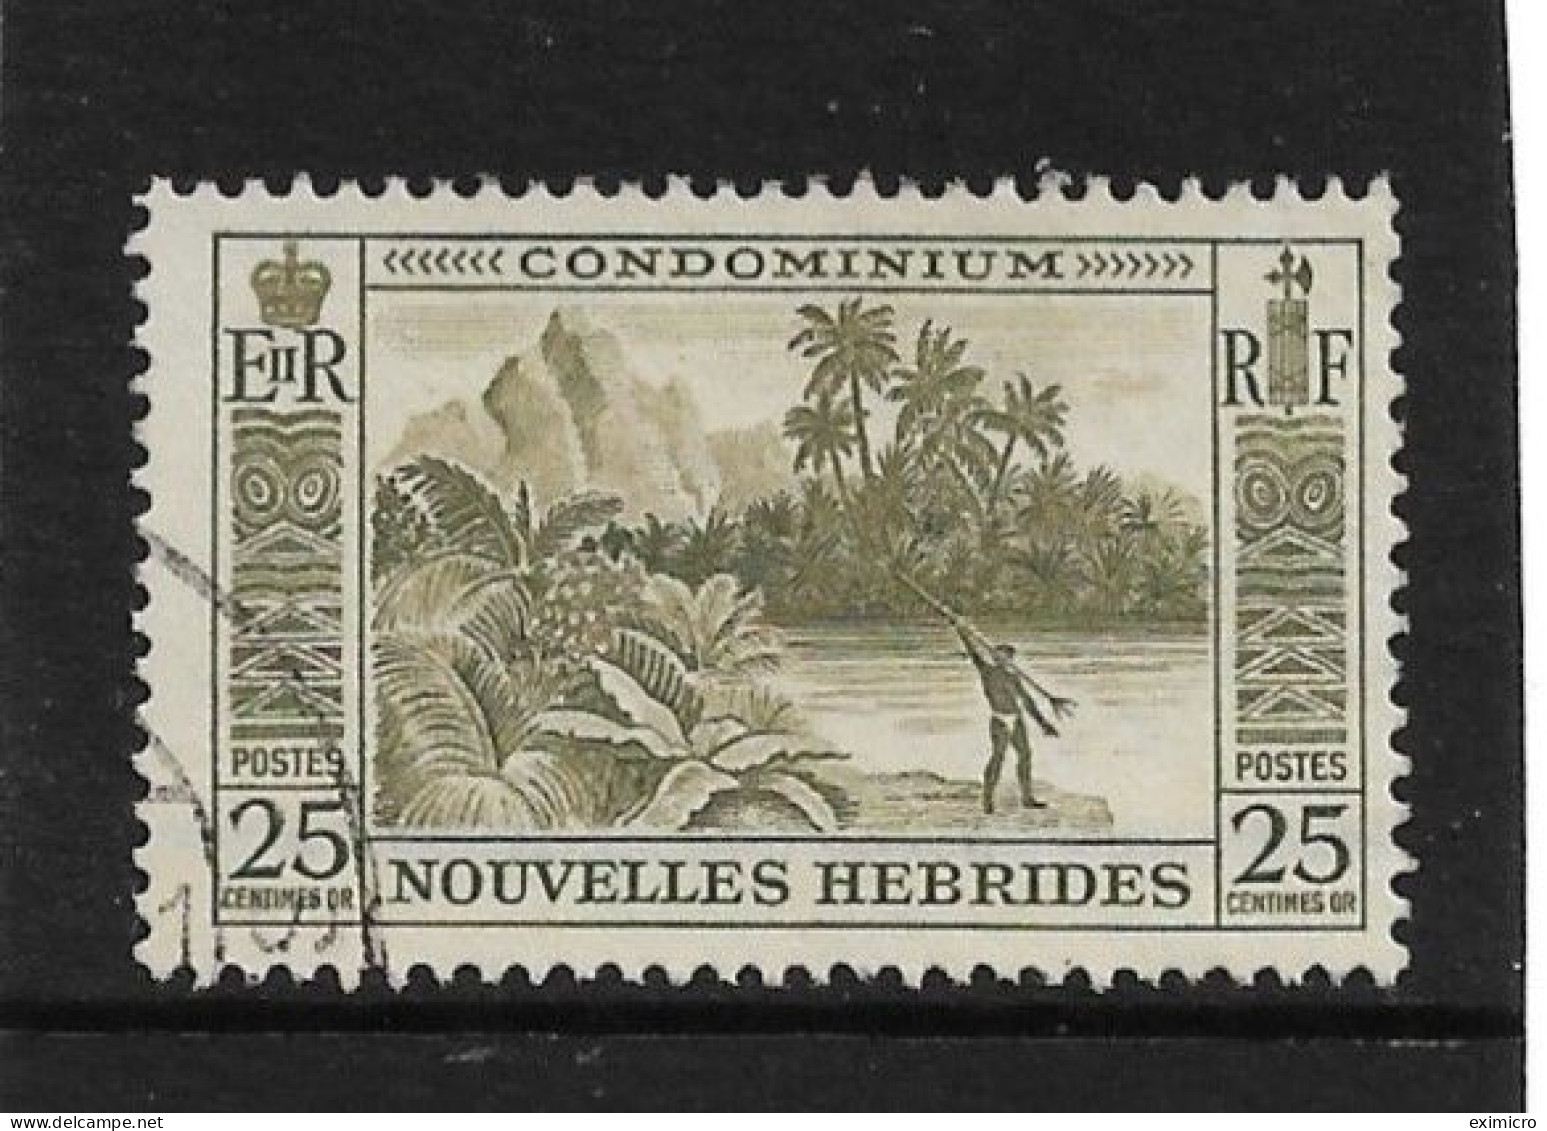 NEW HEBRIDES (FRENCH CURRENCY) 1957 25c SG F100 FINE USED - Gebruikt